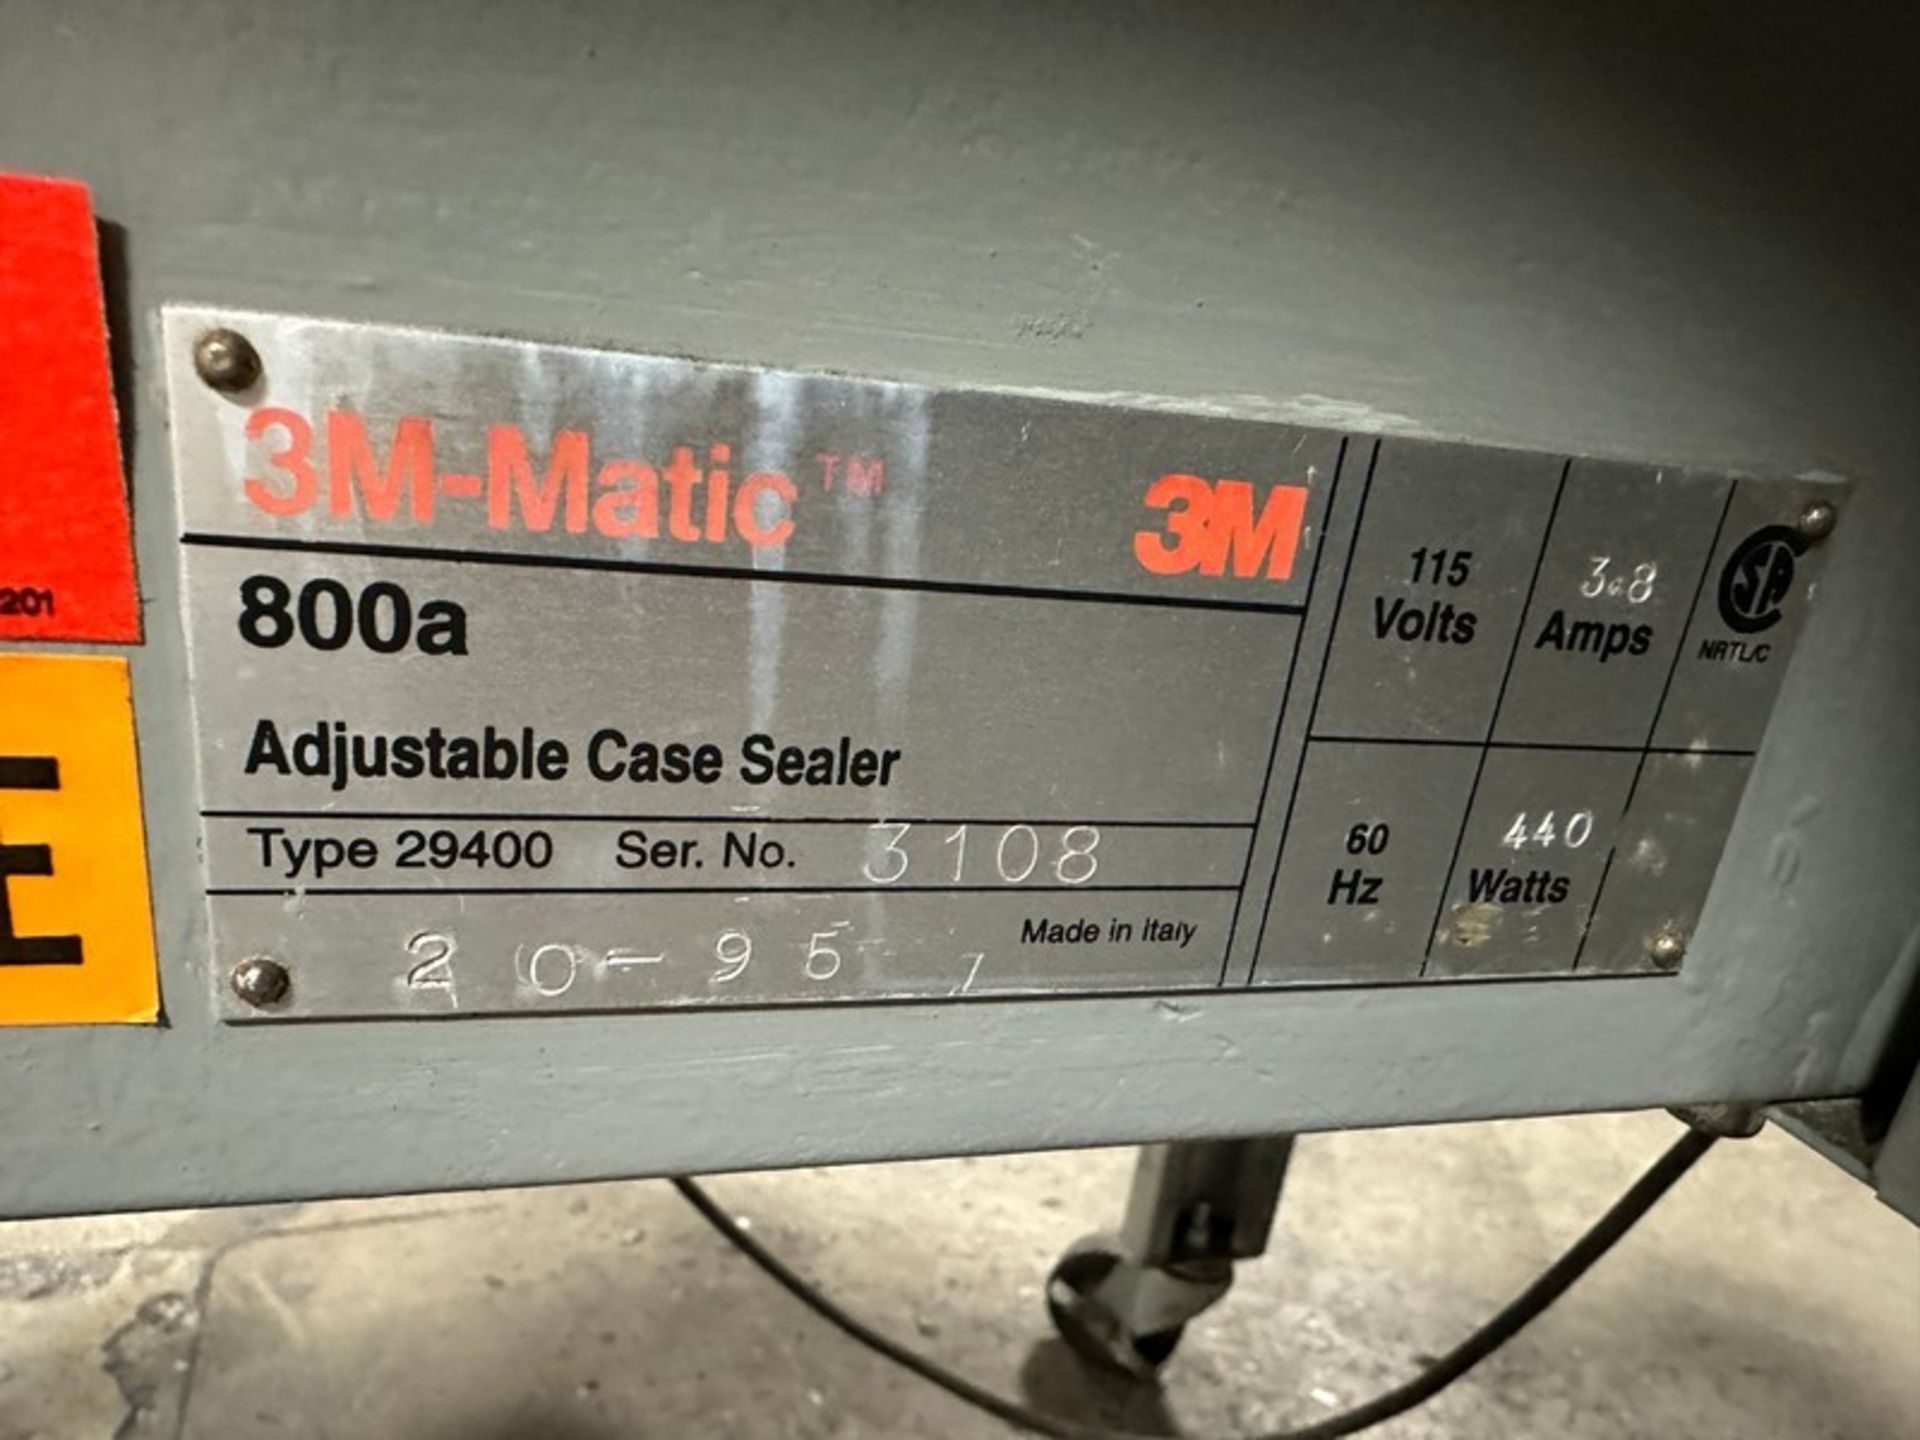 Case Sealer: 3M-Matic Model 800a System (Located East Rutherford, NJ) (NOTE: REMOVAL 2-DAYS ONLY - Image 5 of 8